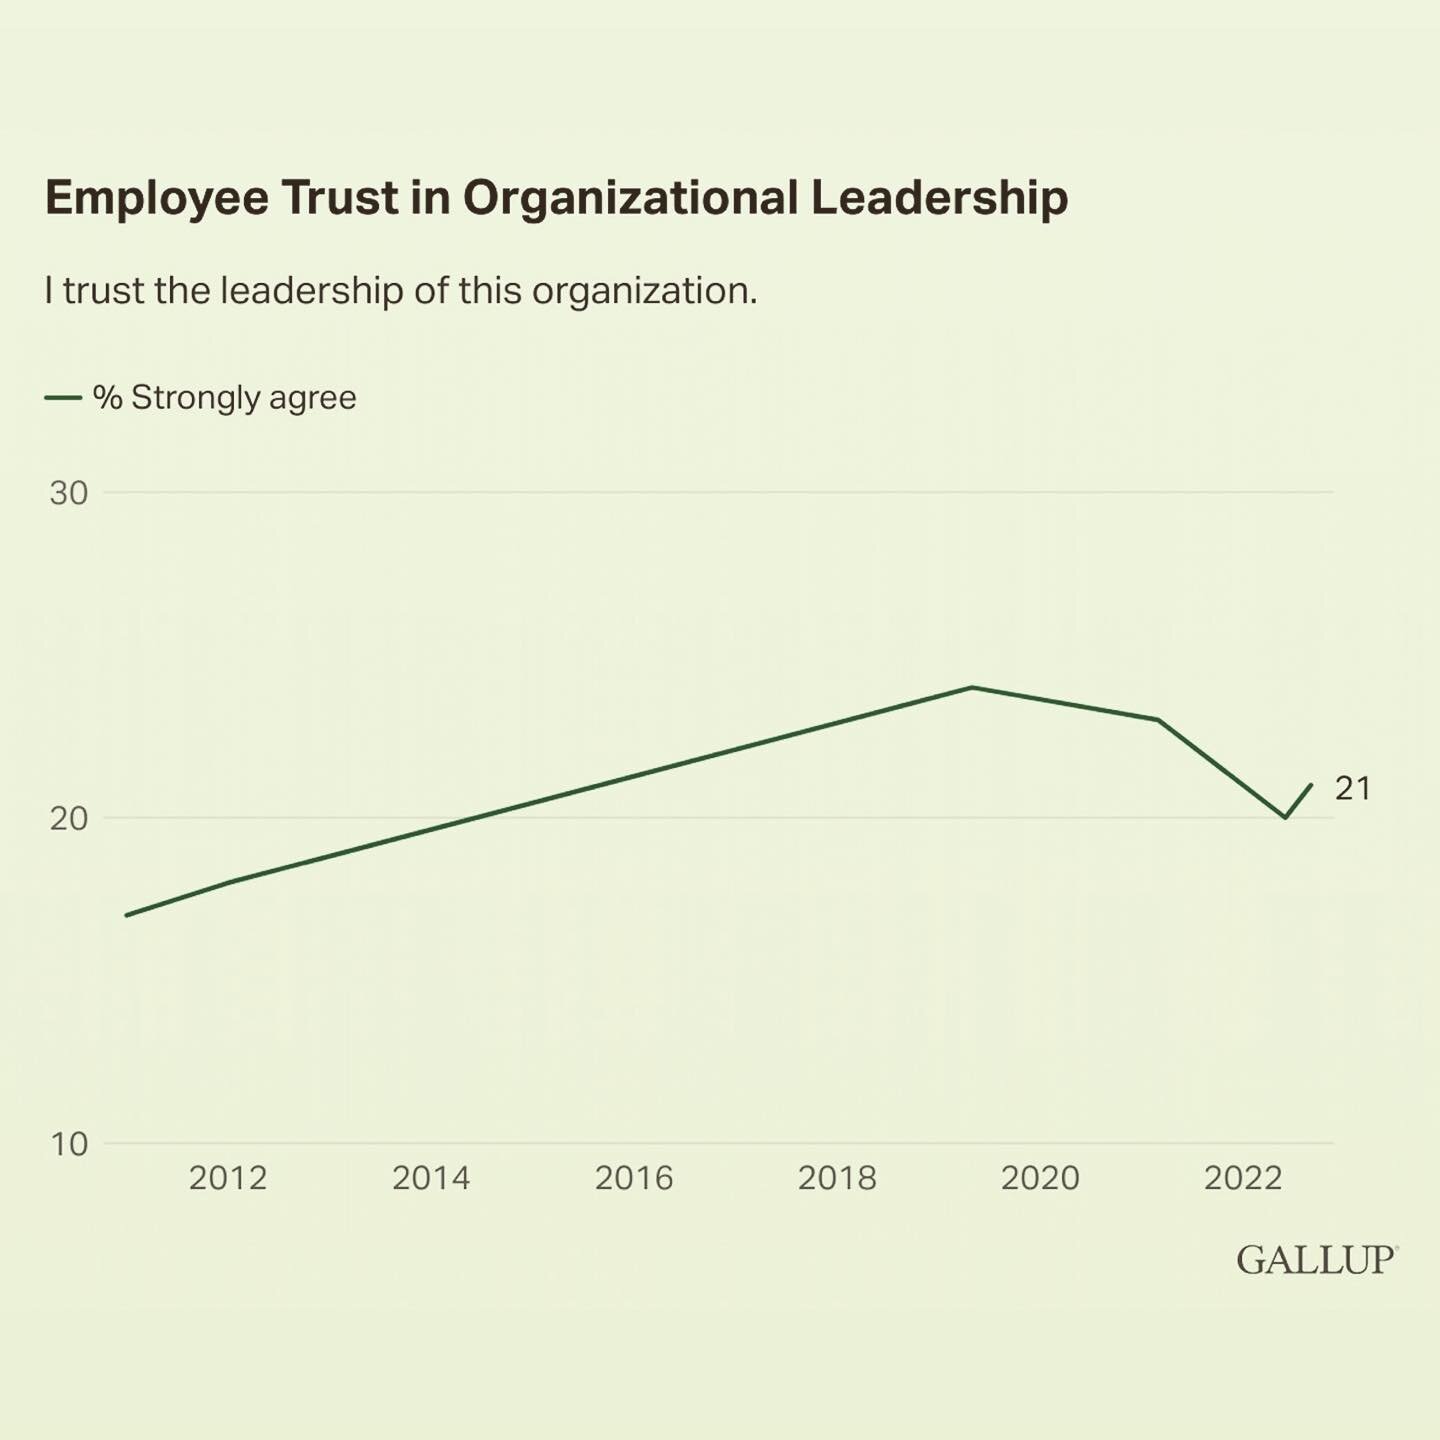 According to @gallup, &ldquo;Only 21% of U.S. employees strongly agree that they trust the leadership of their organization. This marks a noteworthy decline from its 2019 peak (24%) and raises a serious question about morale in American businesses.&r